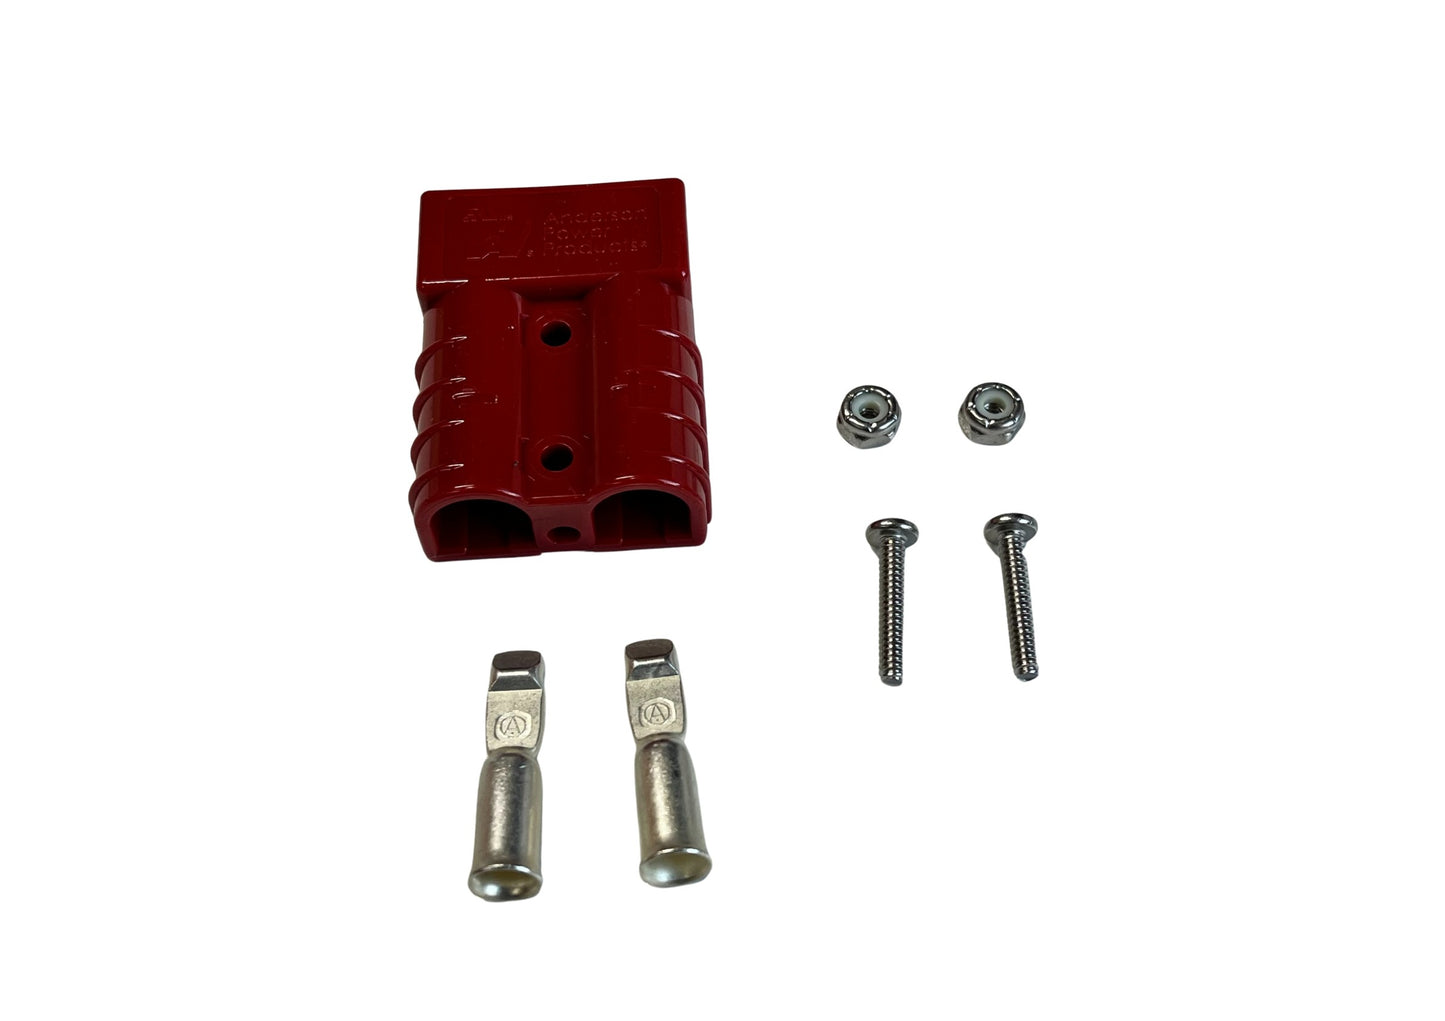 OEX 50A Genuine Anderson Connector, Red with Terminals and Mounting Bolts